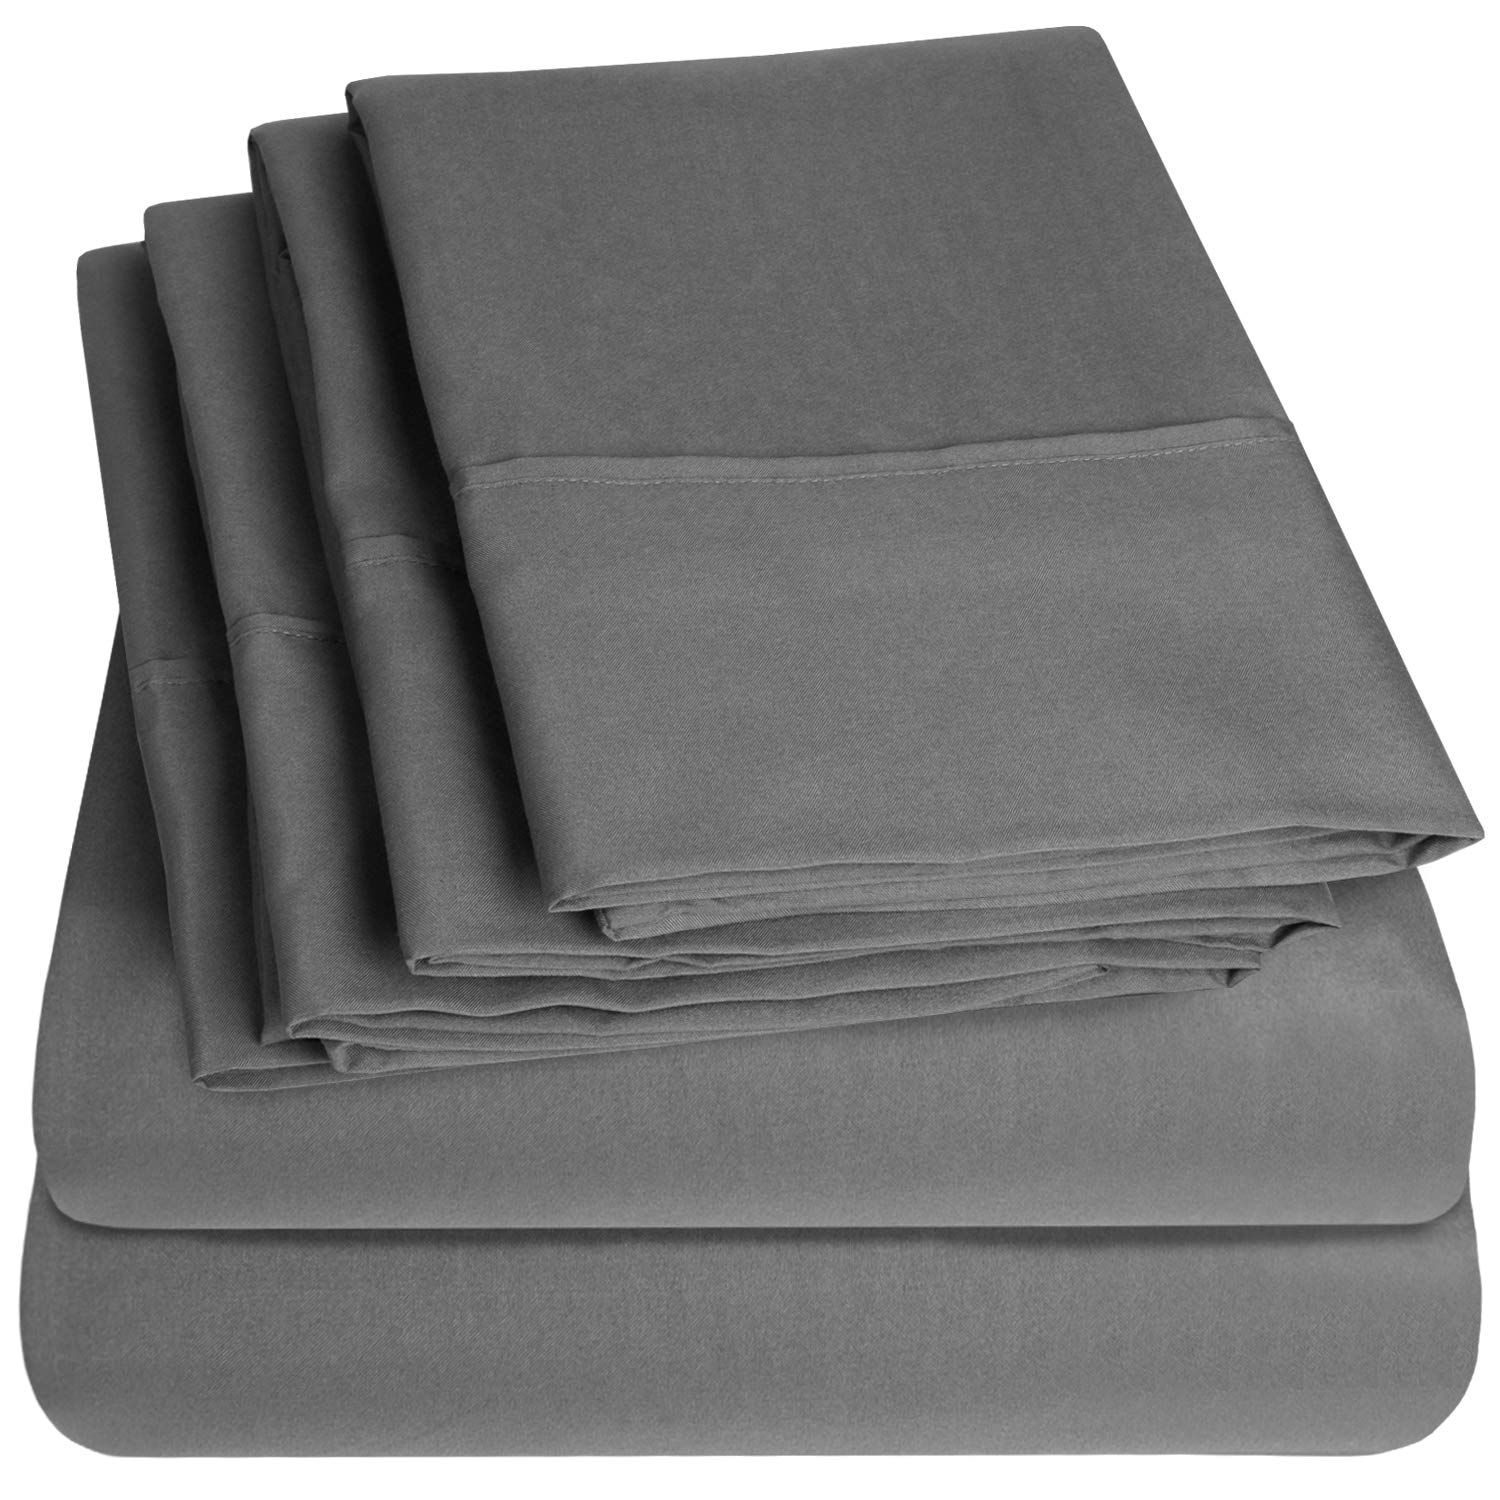 Sweet Home collection 6 Piece 1500 Supreme collection Brushed Microfiber Deep Pocket Sheet Set-2 Extra Pillow cases, great Value